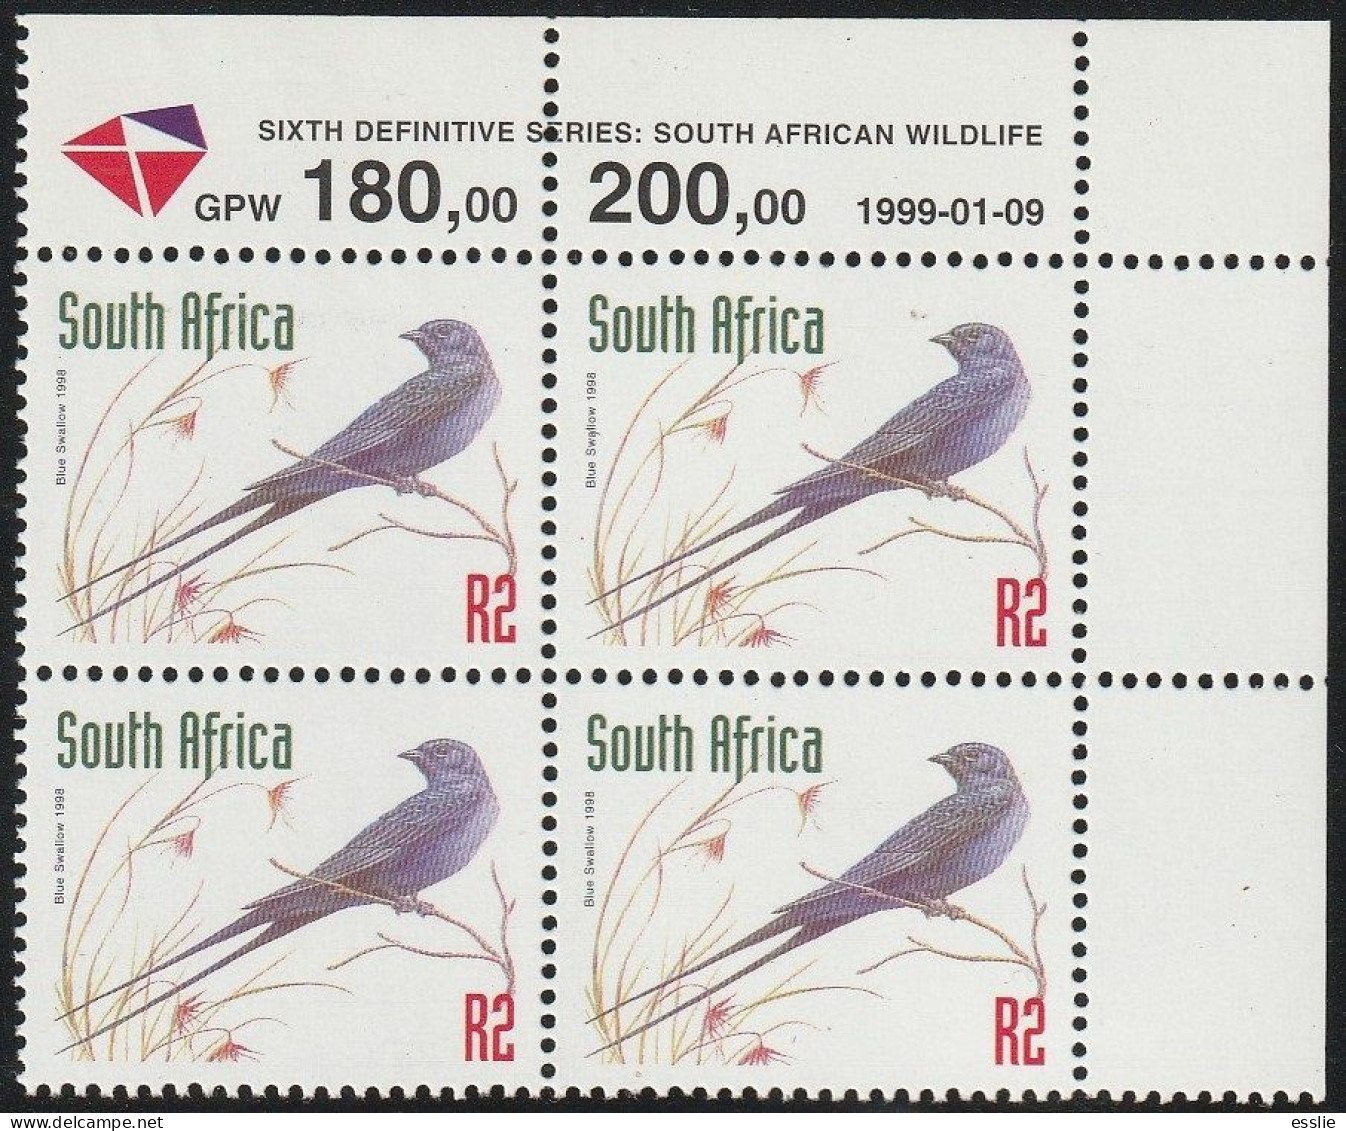 South Africa RSA - 1997 1998 (1999) - Sixth 6th Definitive Redrawn Endangered Fauna Blue Swallow - Rondini